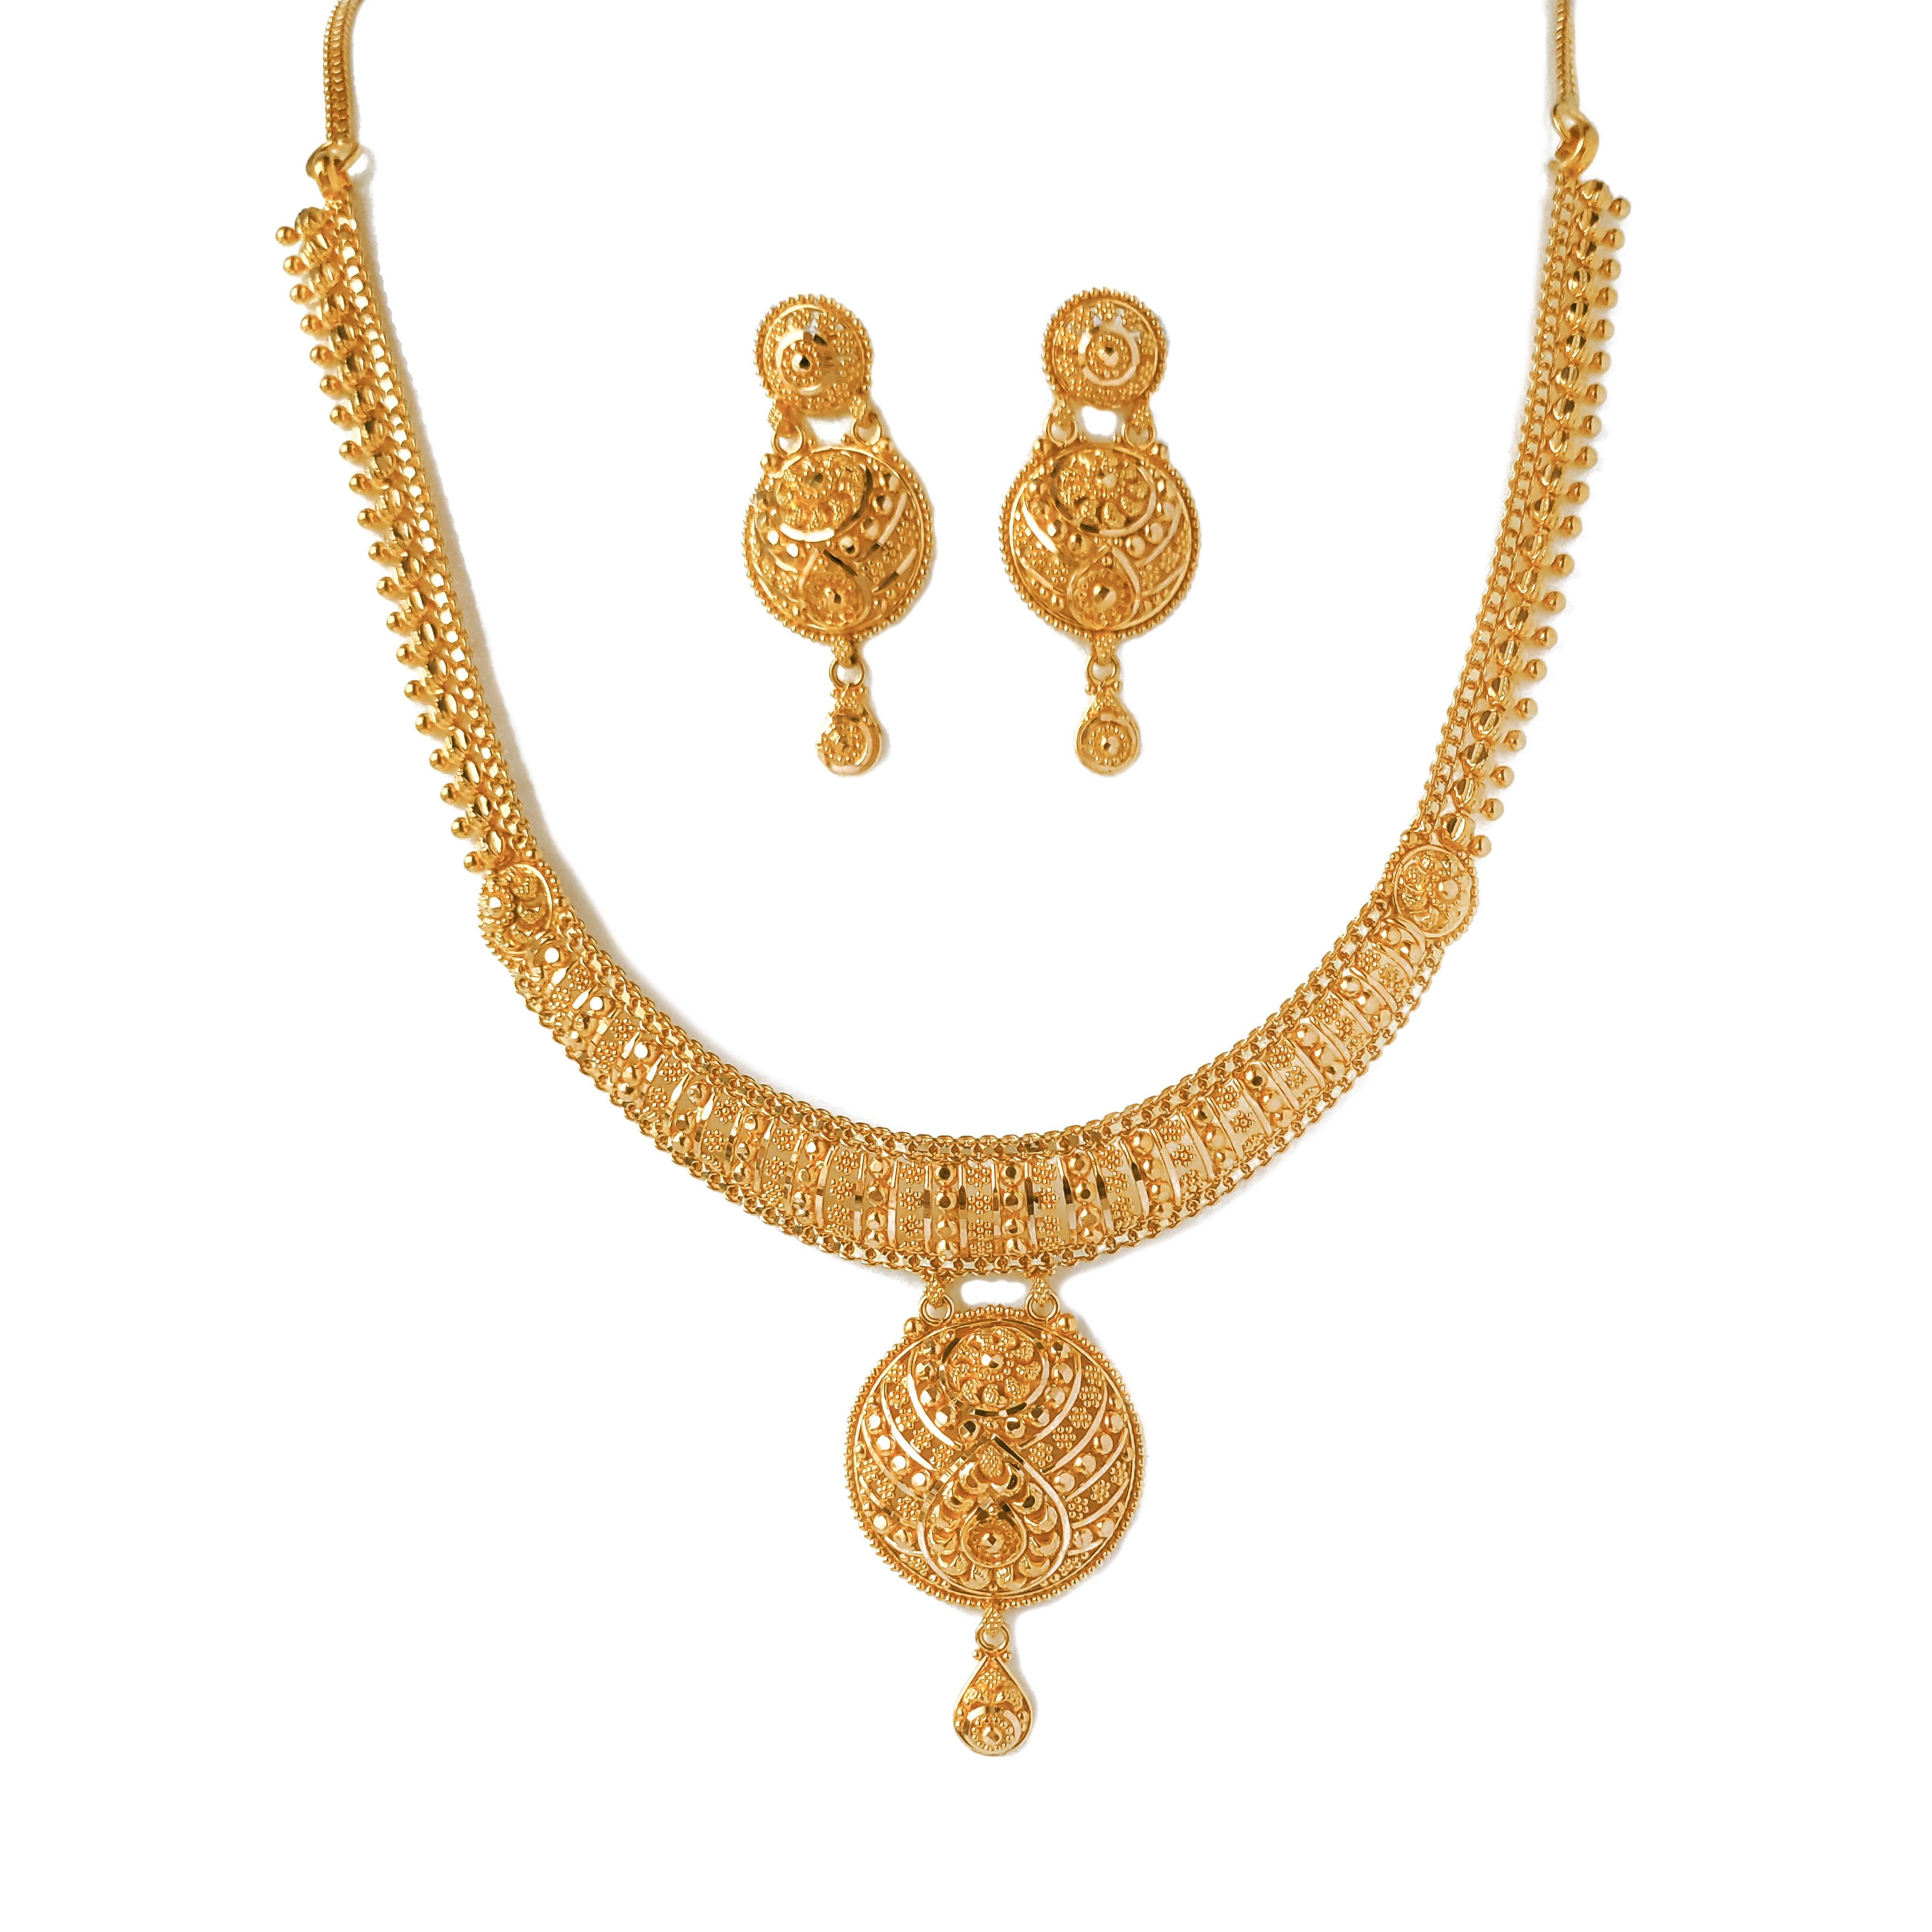 22ct Gold Filigree Design Jali Style Necklace and Earring Set N&E-8234 - Minar Jewellers